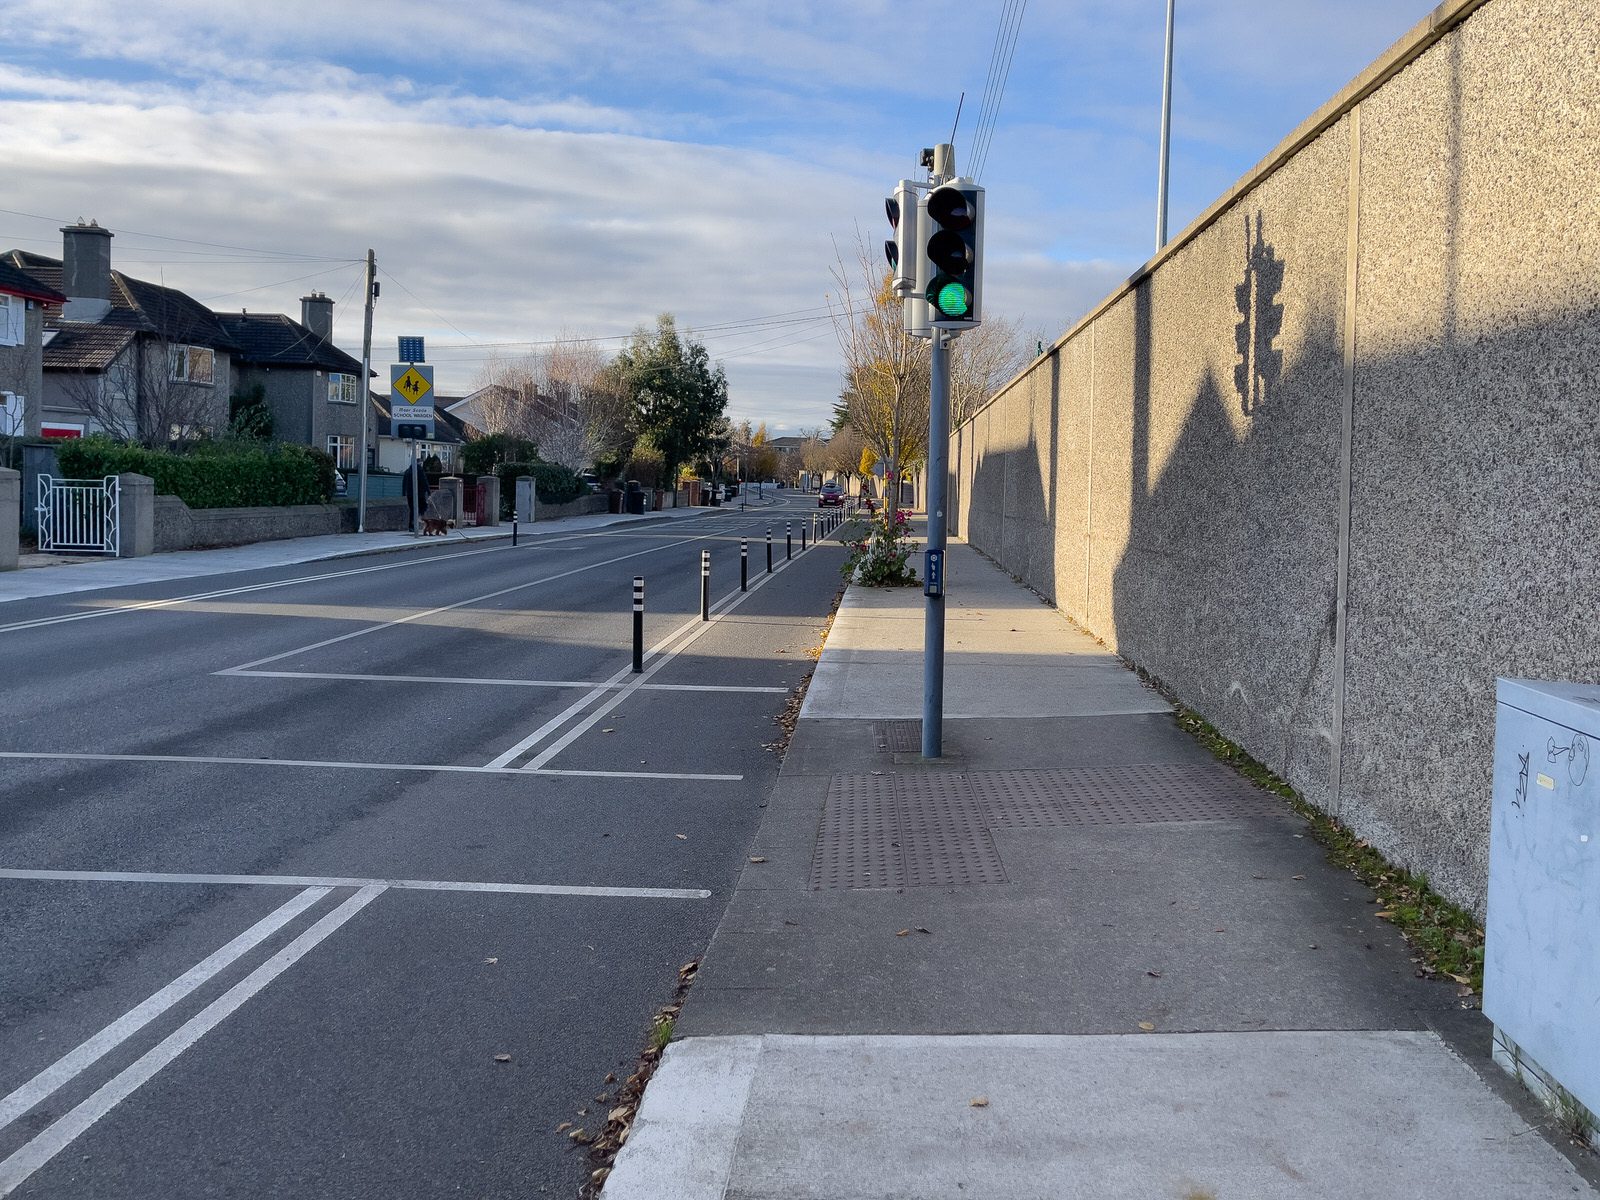 MY FIRST DAY WITHOUT THE 17 BUS SERVICE [WALK FROM S4 BUS STOP IN UCD TO ROEBUCK ROAD]-225593-1